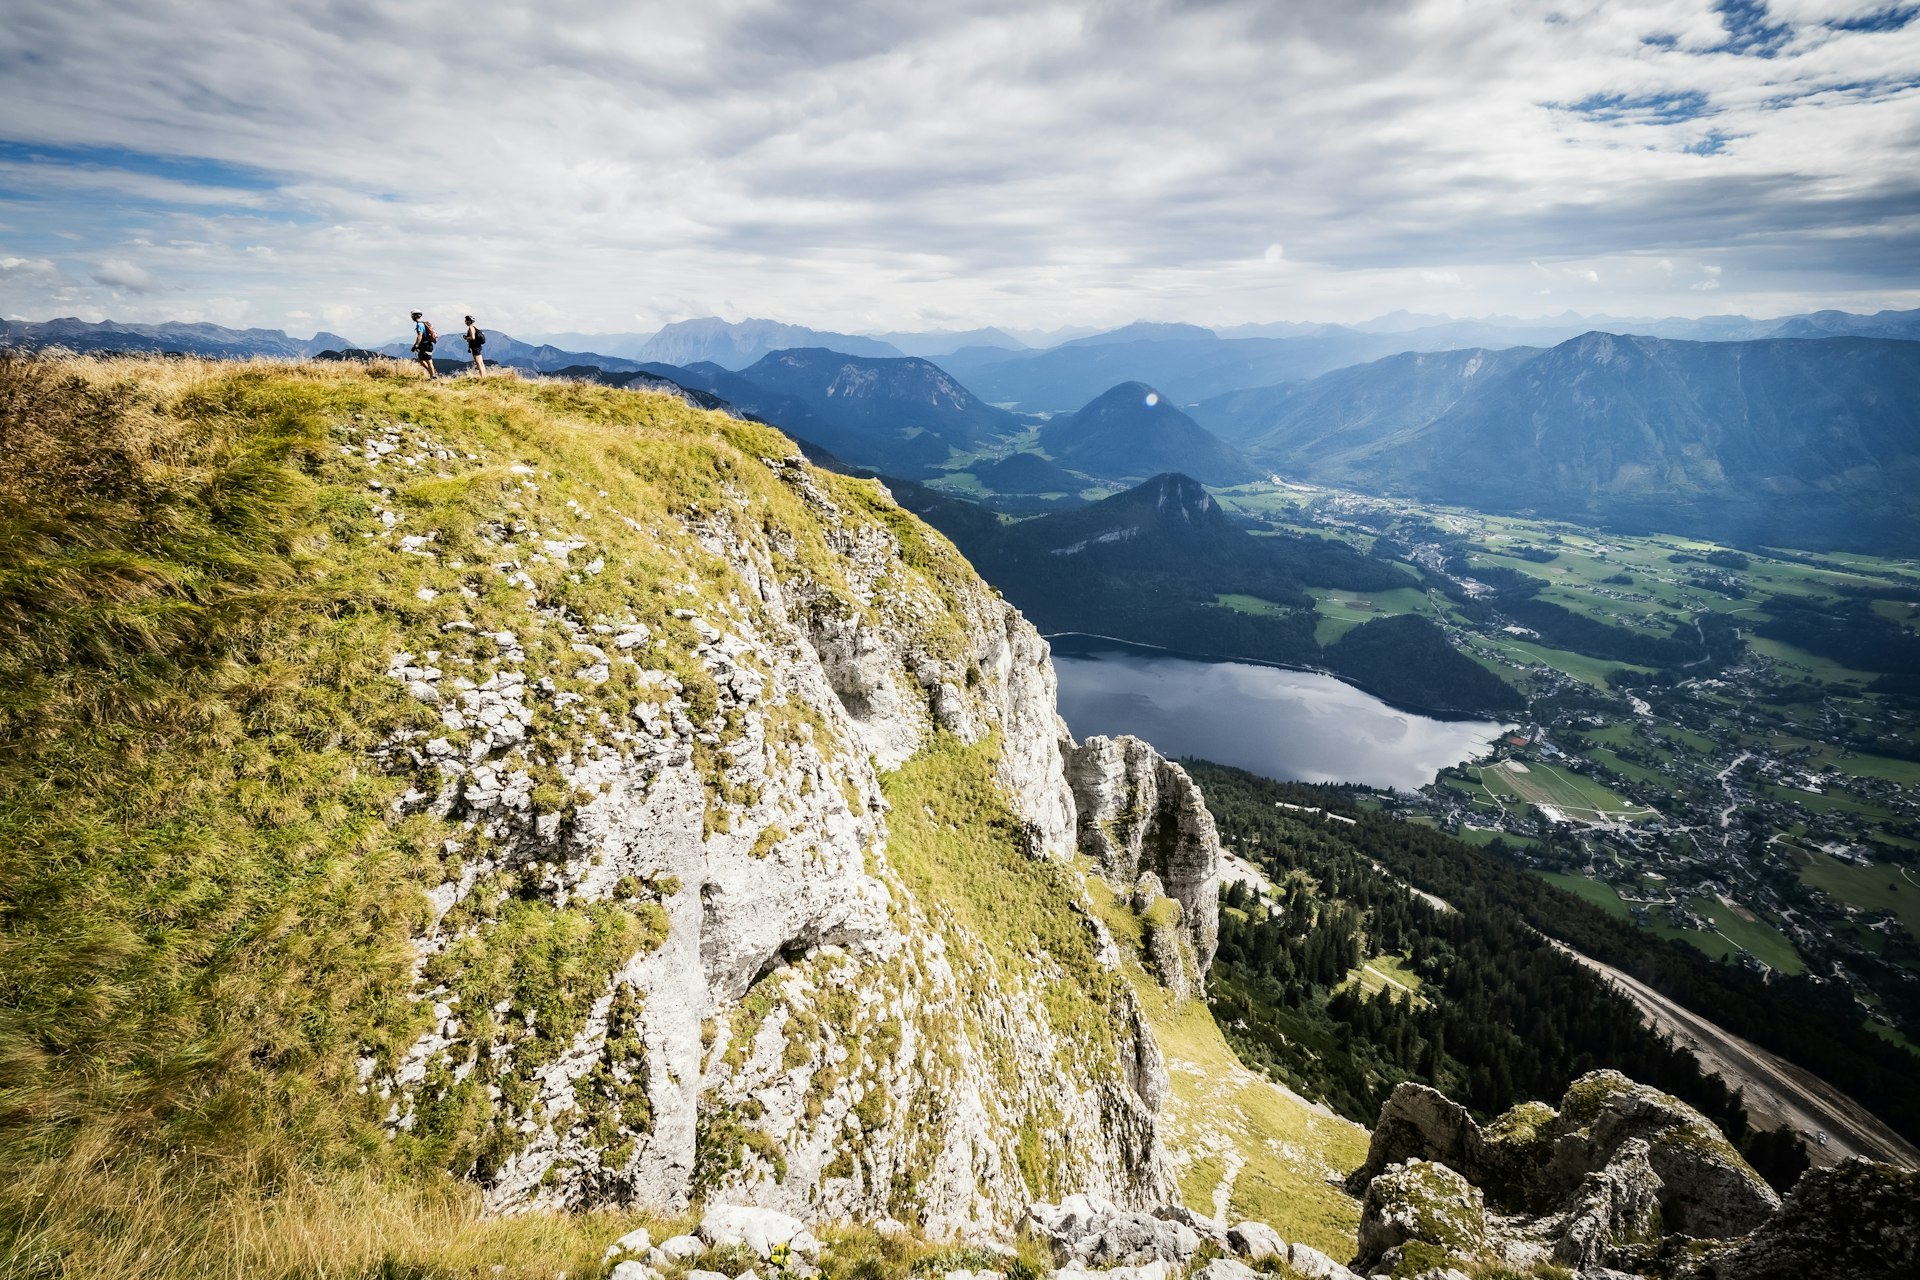 Two mountain climbers on a ridge on the way up to the summit of Loser mountain, Altaussee, Austria